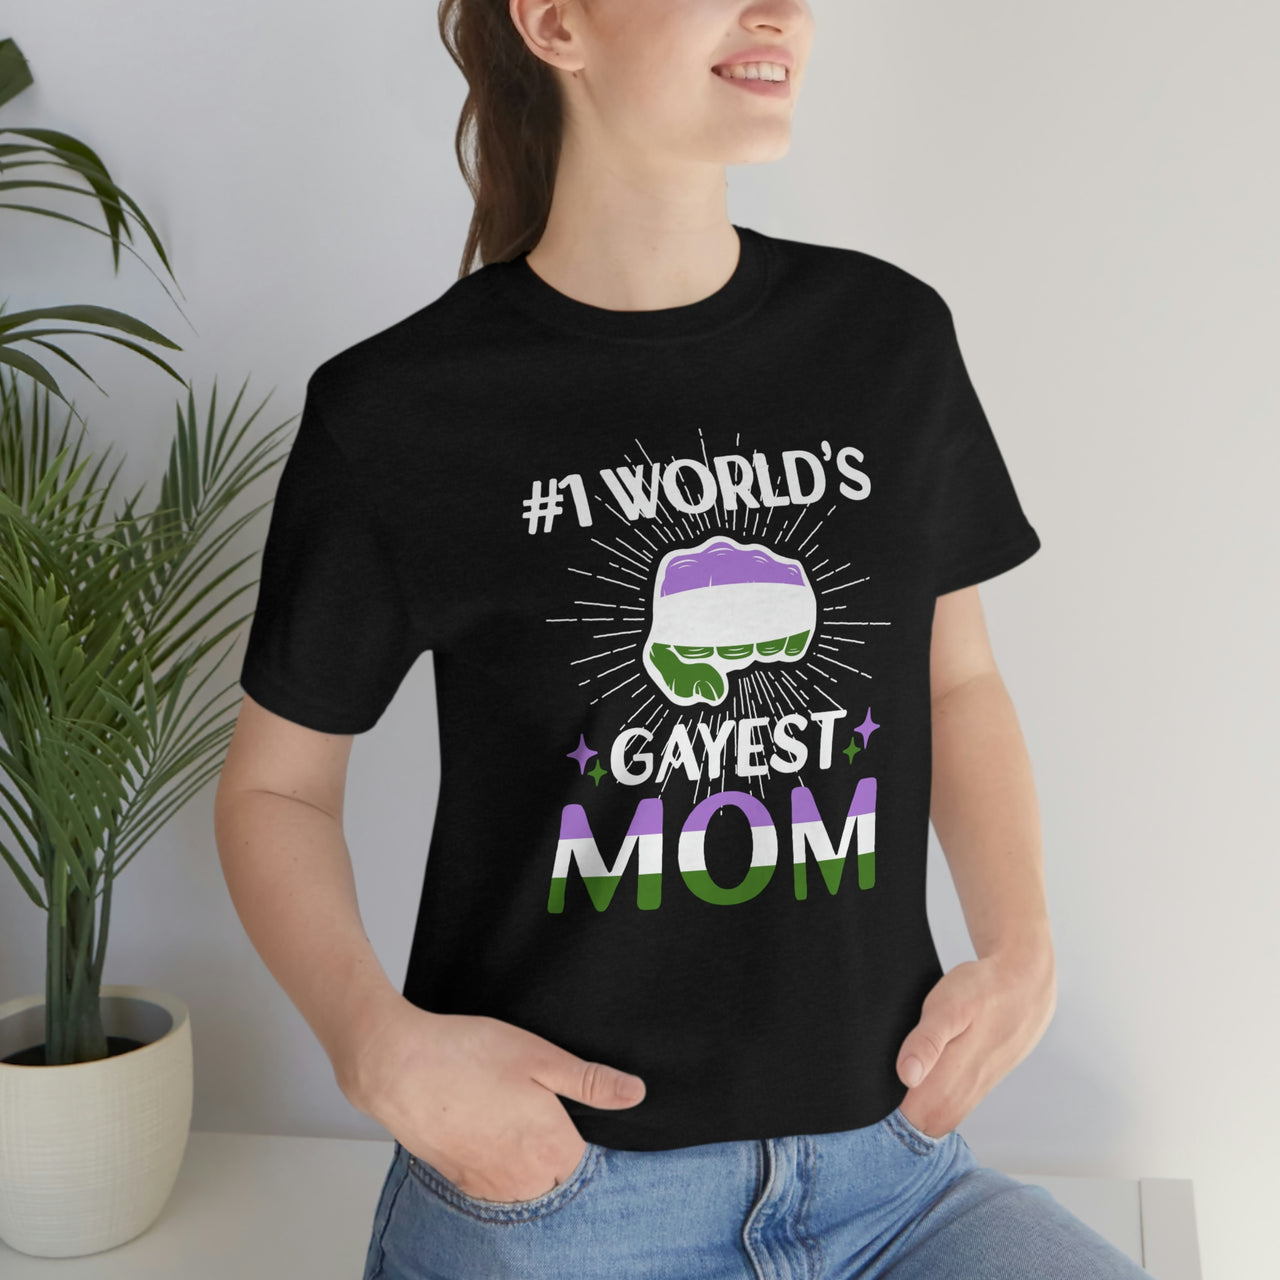 Genderqueer Pride Flag Mother's Day Unisex Short Sleeve Tee - #1 World's Gayest Mom SHAVA CO